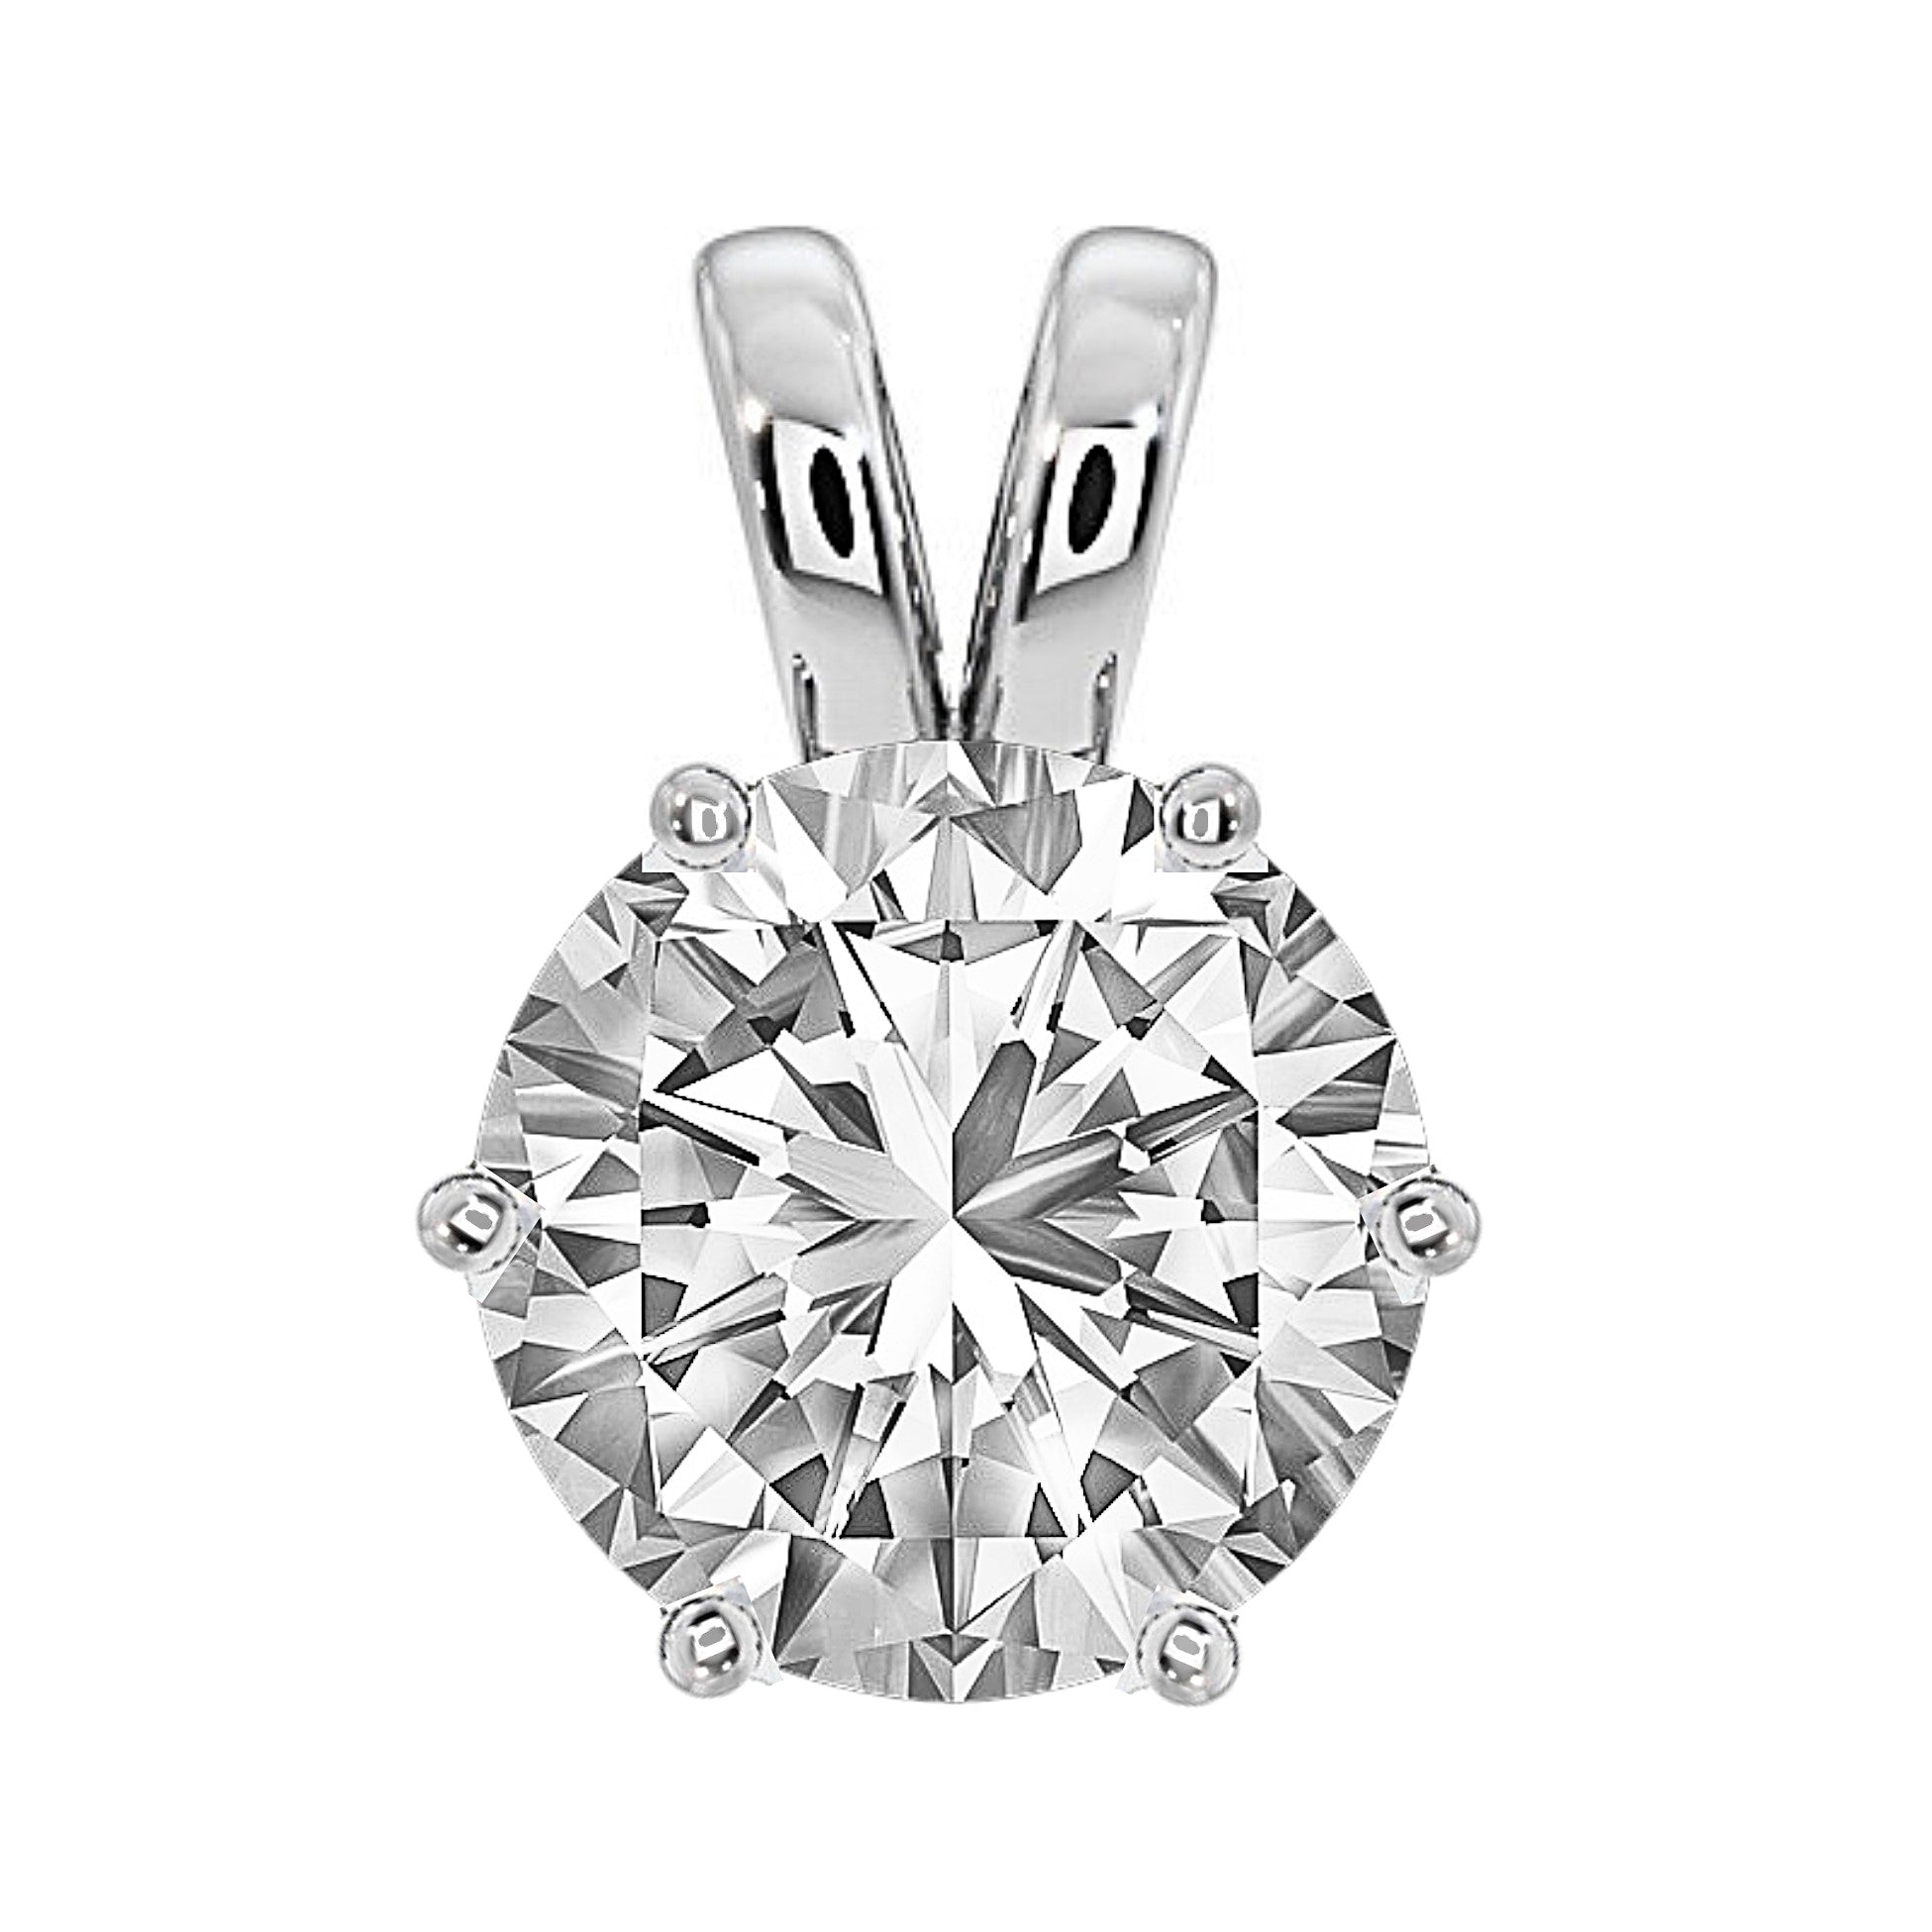 2-Carat MYZA Sterling Silver Necklace & Ring Combo - MYZA 